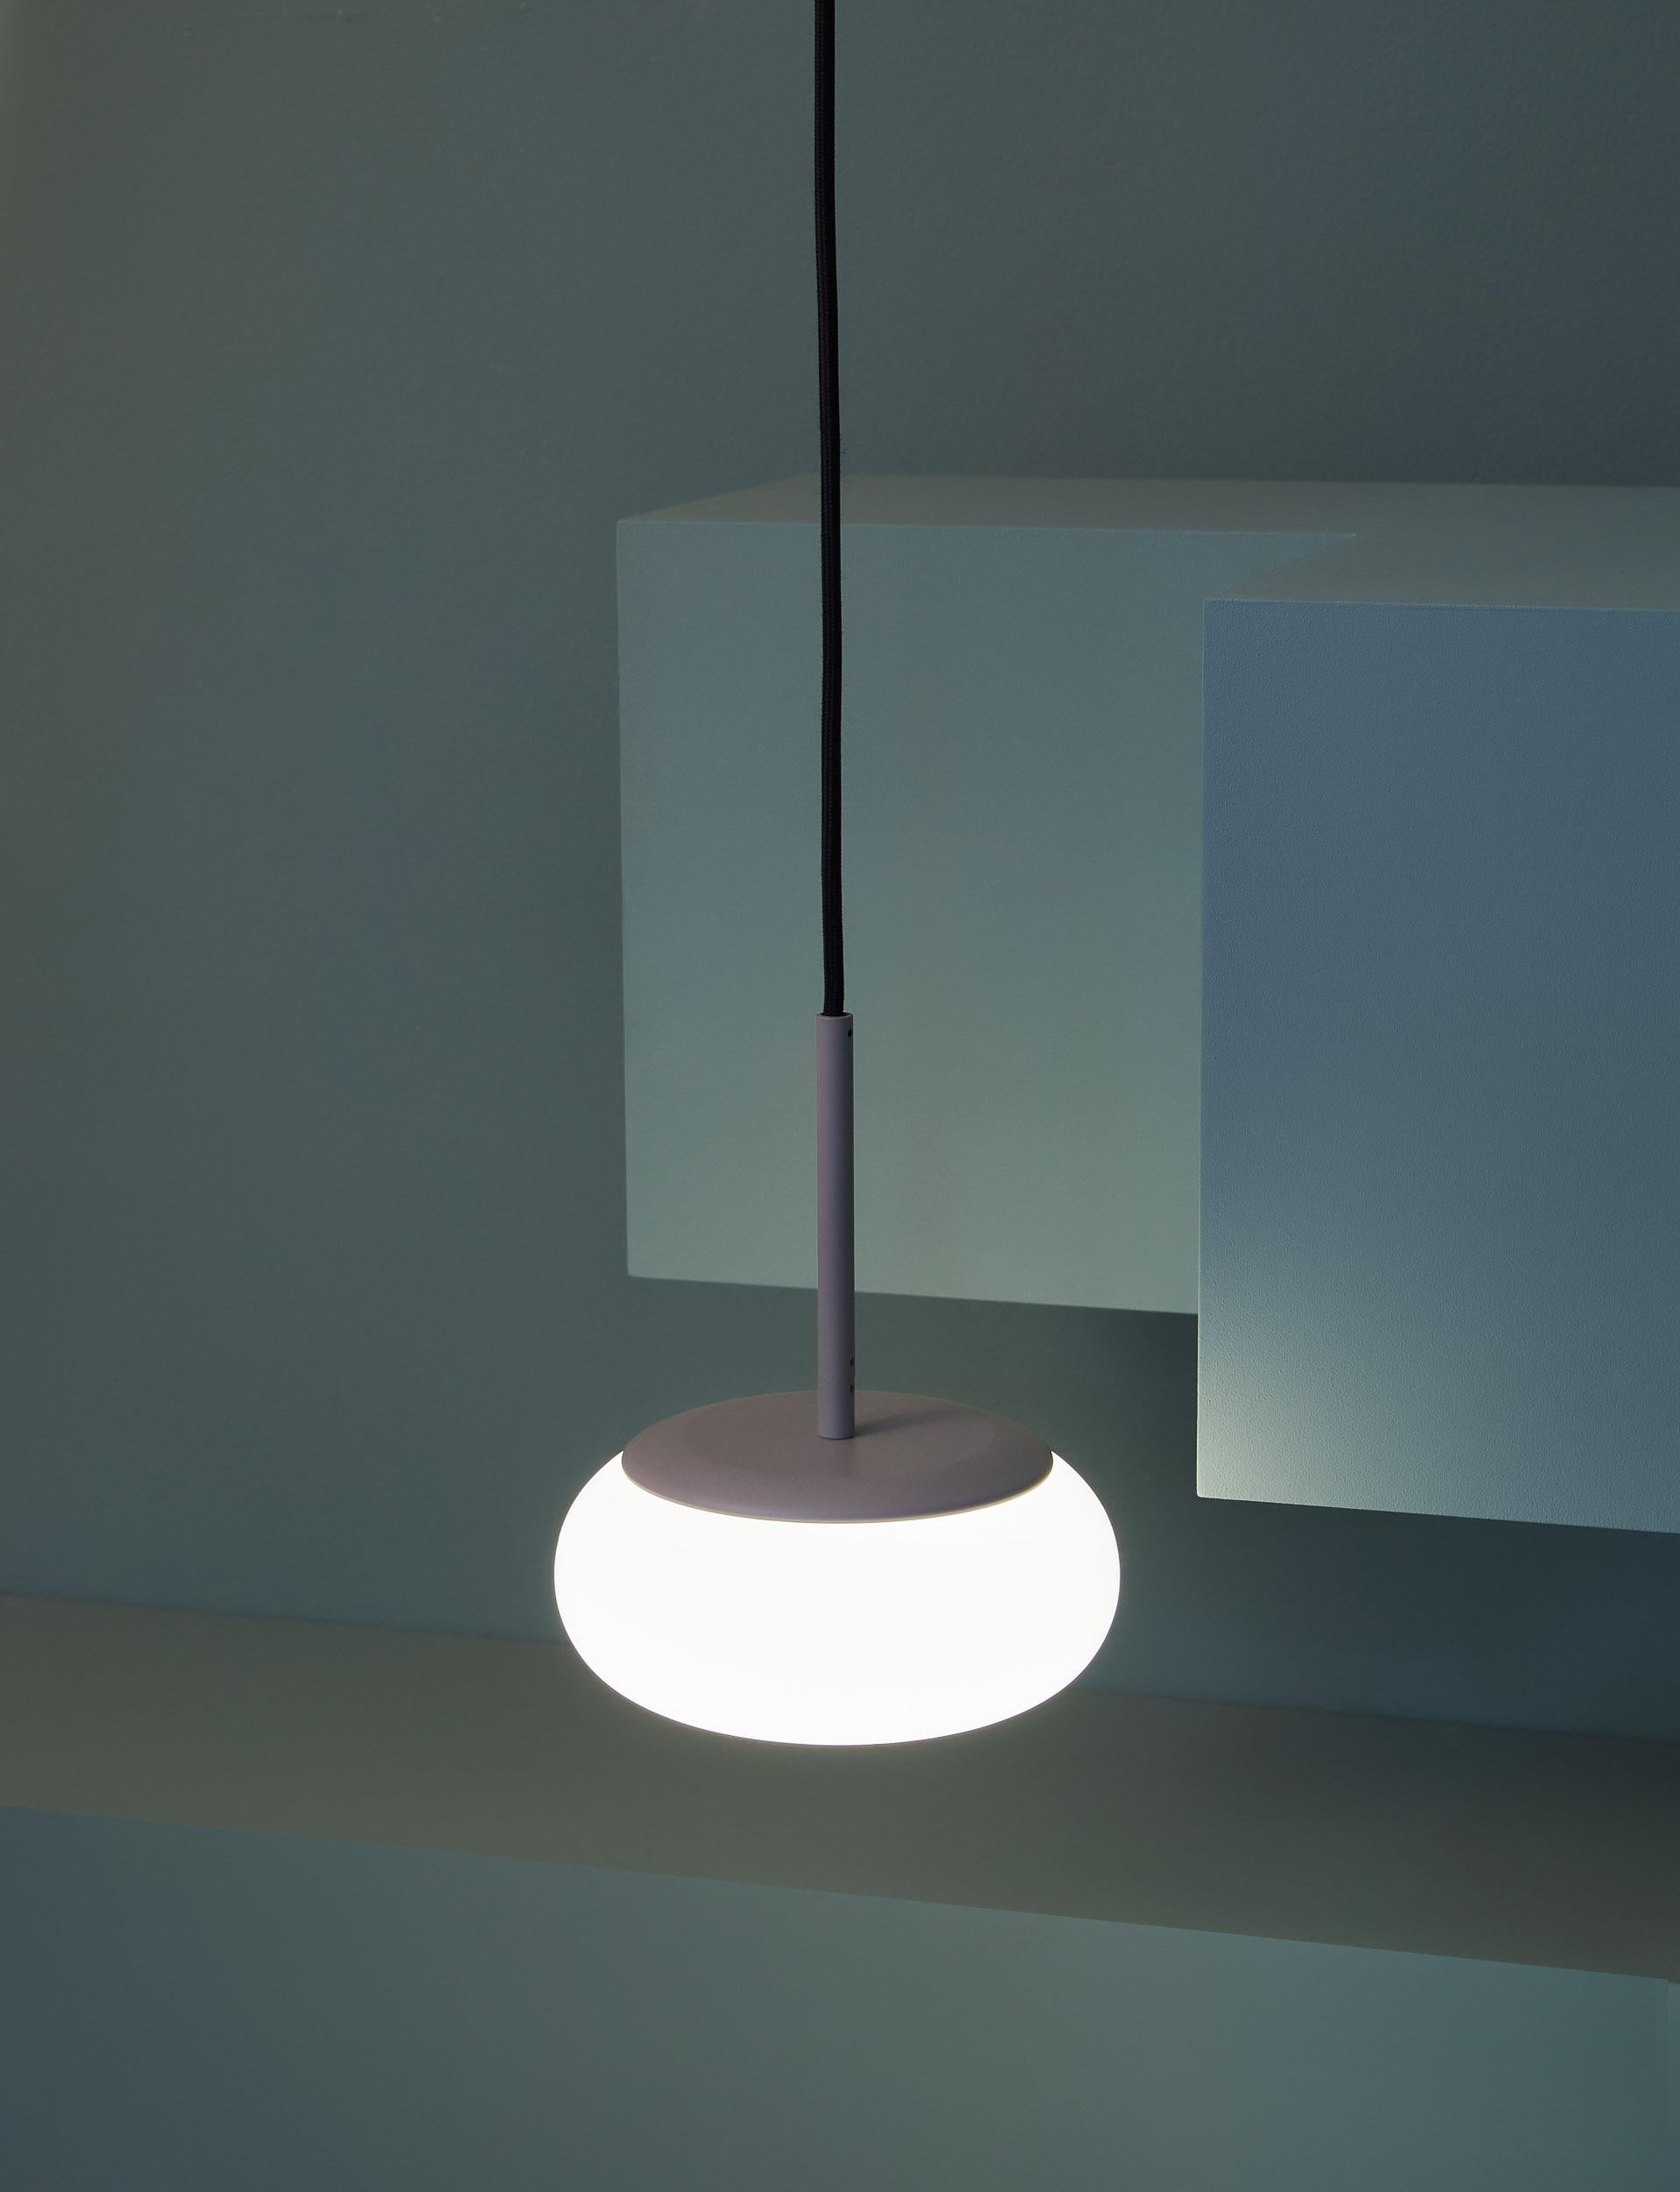 Mozzi Pendant Lamp by AGO Lighting
Small Egg White

Opal glass, Steel, Aluminum Integrated LED (SMD), DC
Light source: Integrated LED (SMD), DC
Watt: 6 W
Color Temp. 2700 / 3000 K
Cable Lengths 3M
Ceiling cup Ø 90, H 40 mm

Two sizes